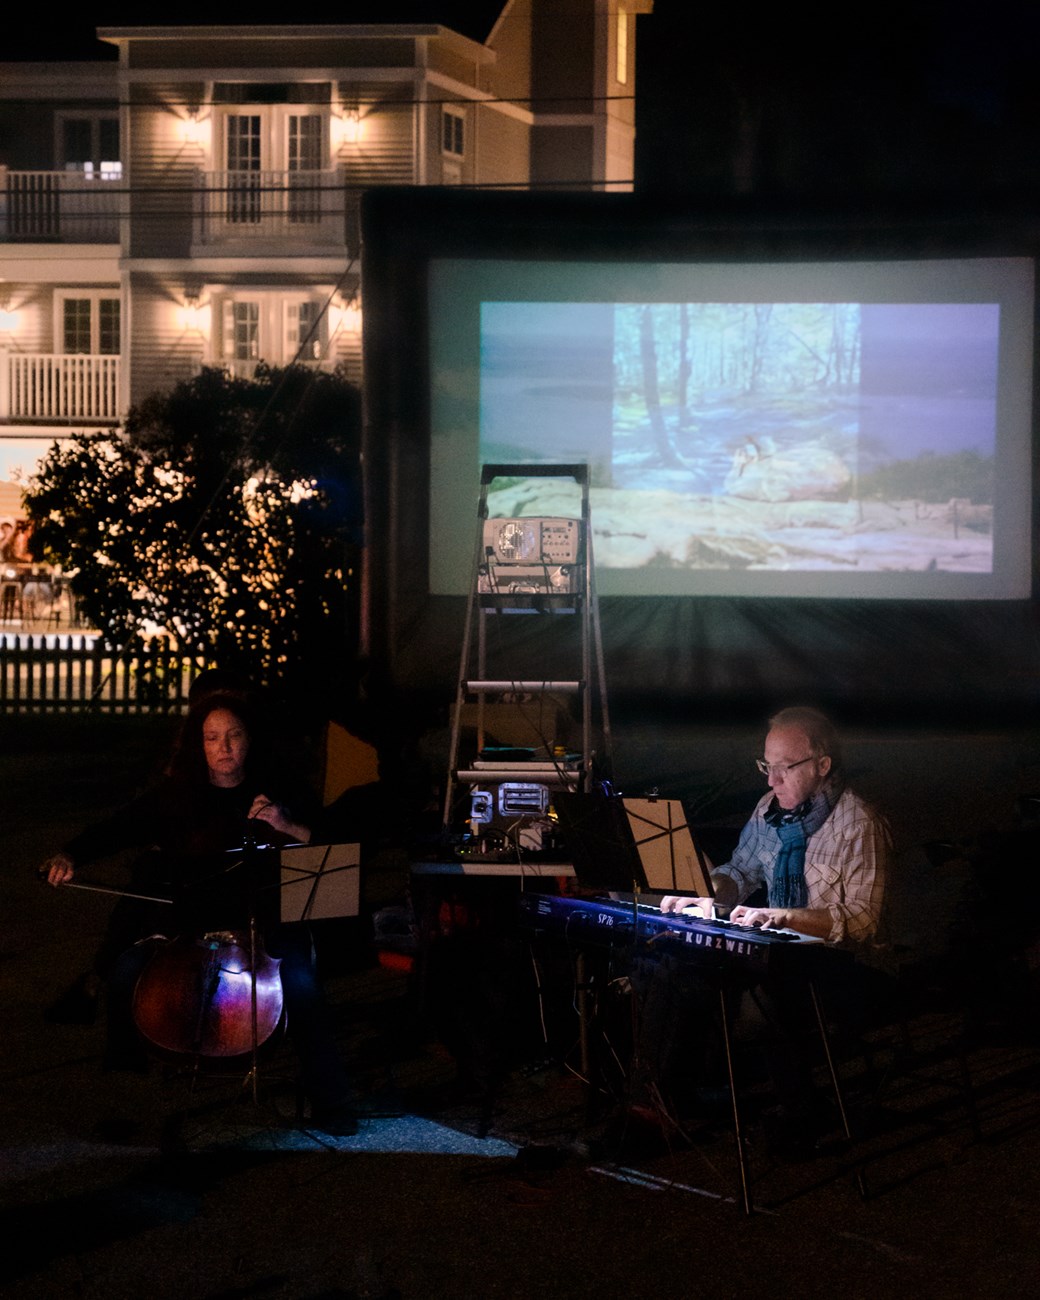 In a dark outdoor space in front of a movie screen, a man plays piano and a woman plays cello.